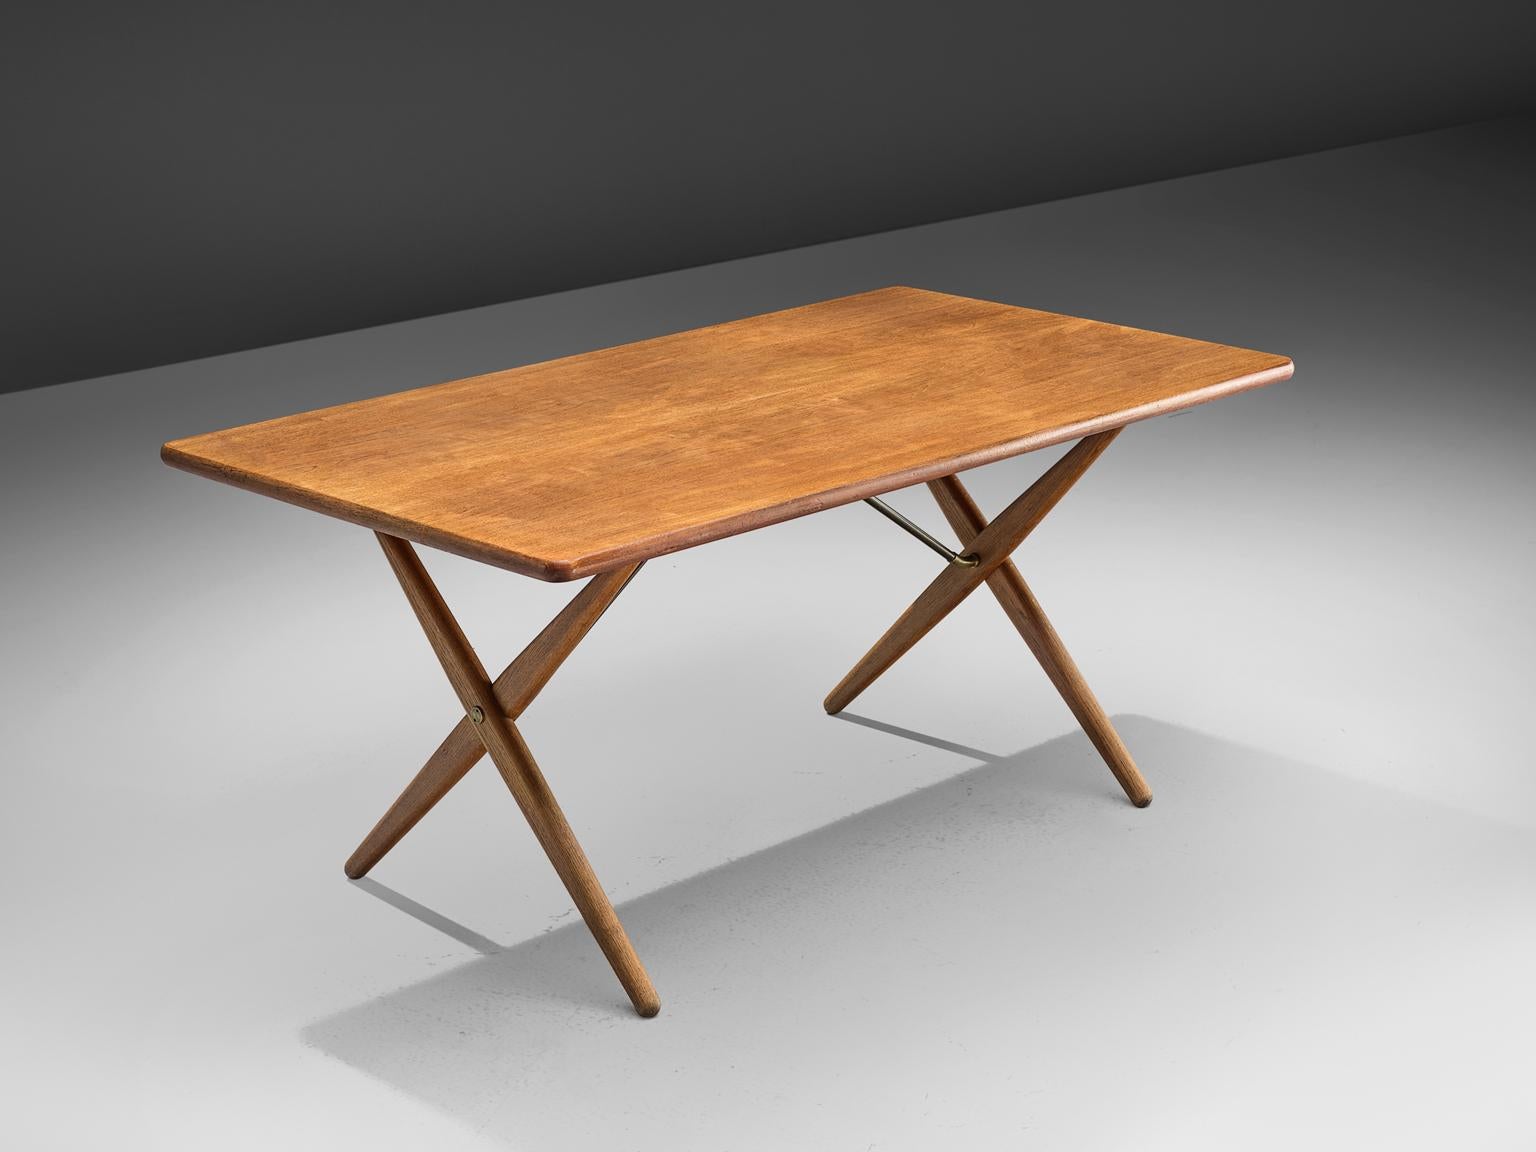 Hans J. Wegner for Andreas Tuck, table model AT-303, in teak, oak and metal, Denmark, 1955. 

Dining table with elegant X-shaped legs, by Danish Designer Hans Wegner. This table is considered as one of the best known designs from Wegner. From a